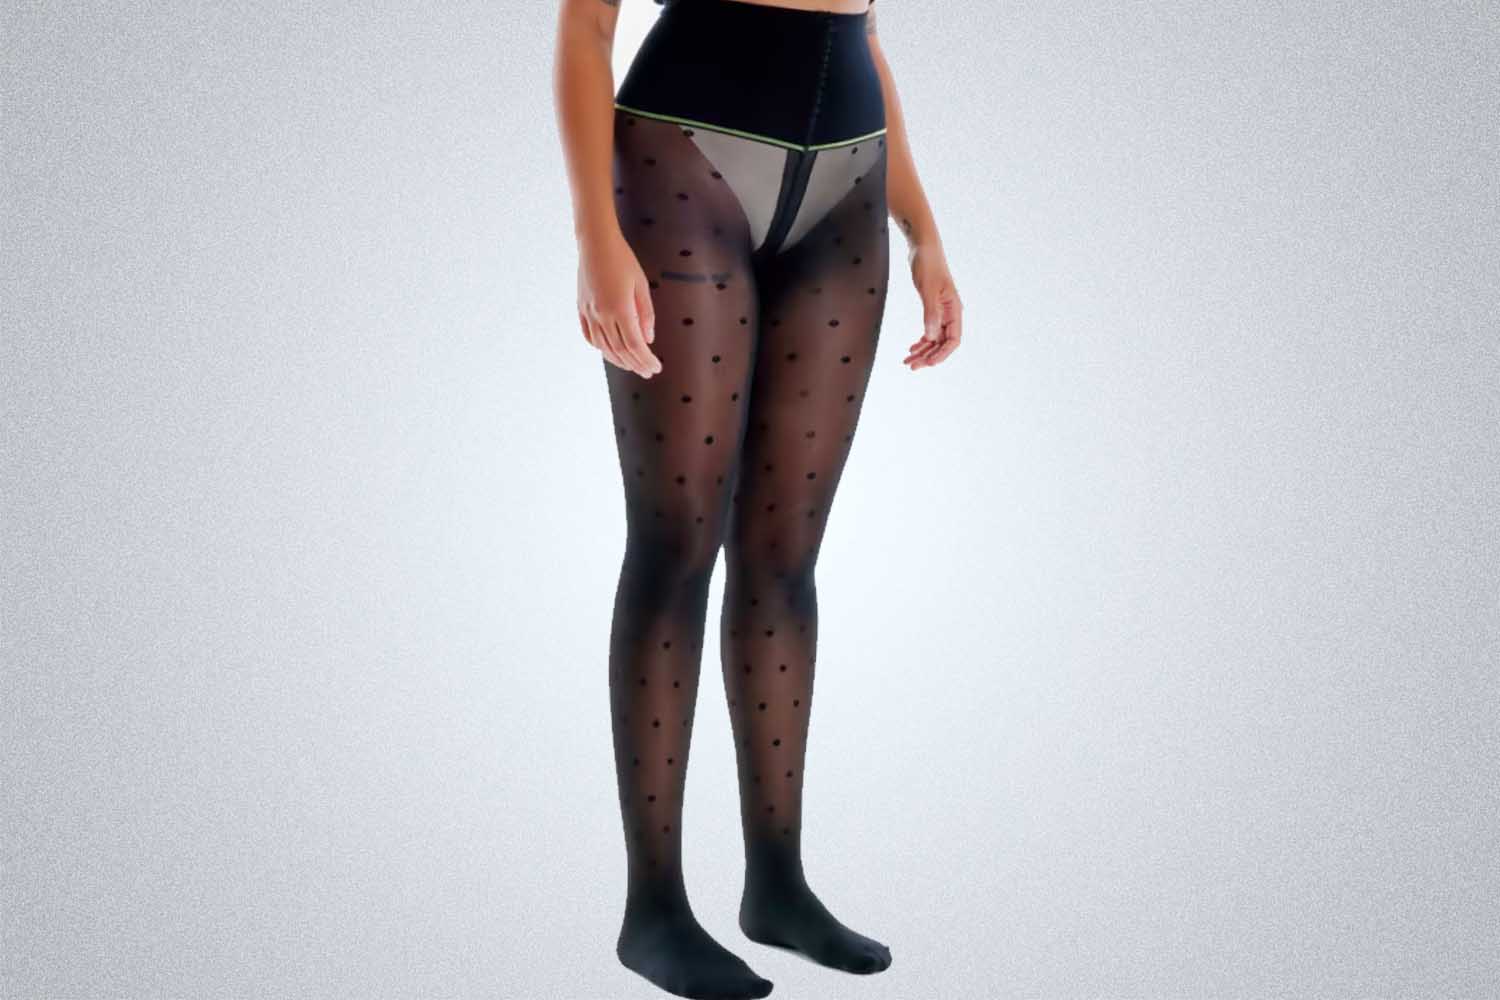 Sheertex Stockings Are the Best Gift You Can Buy the Woman in Your Life pic